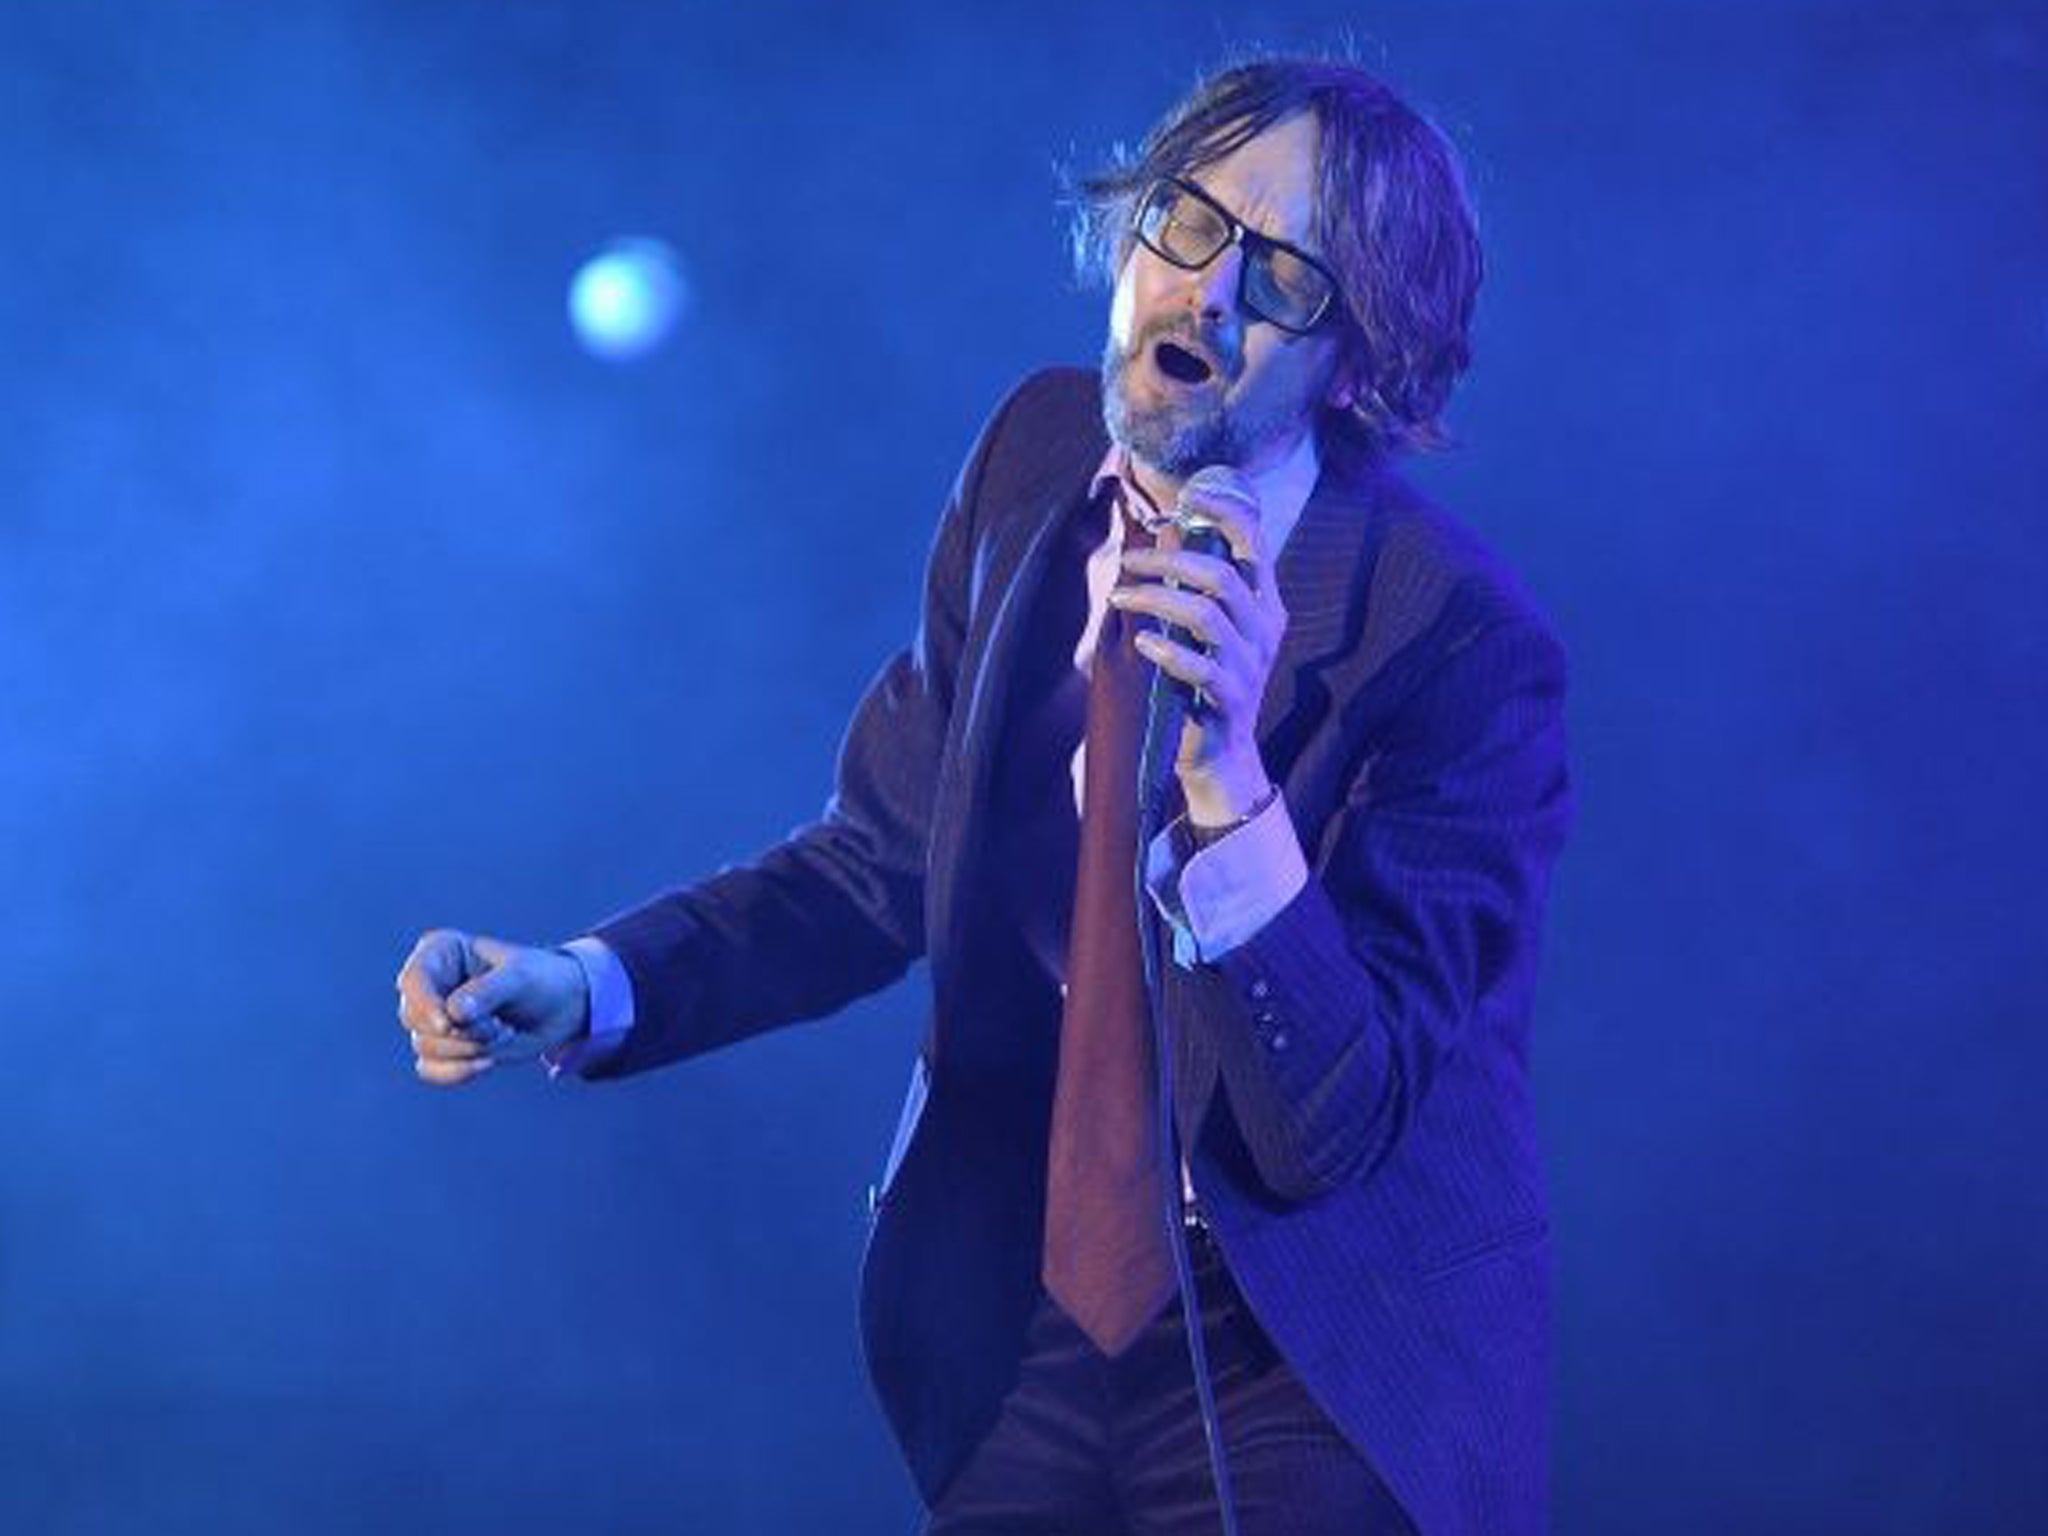 Pulp played a reunion homecoming show in Sheffield – and as a parting shot left a Christmas card to all the attendees which contained a code to download a gift from the band’s website on Christmas day